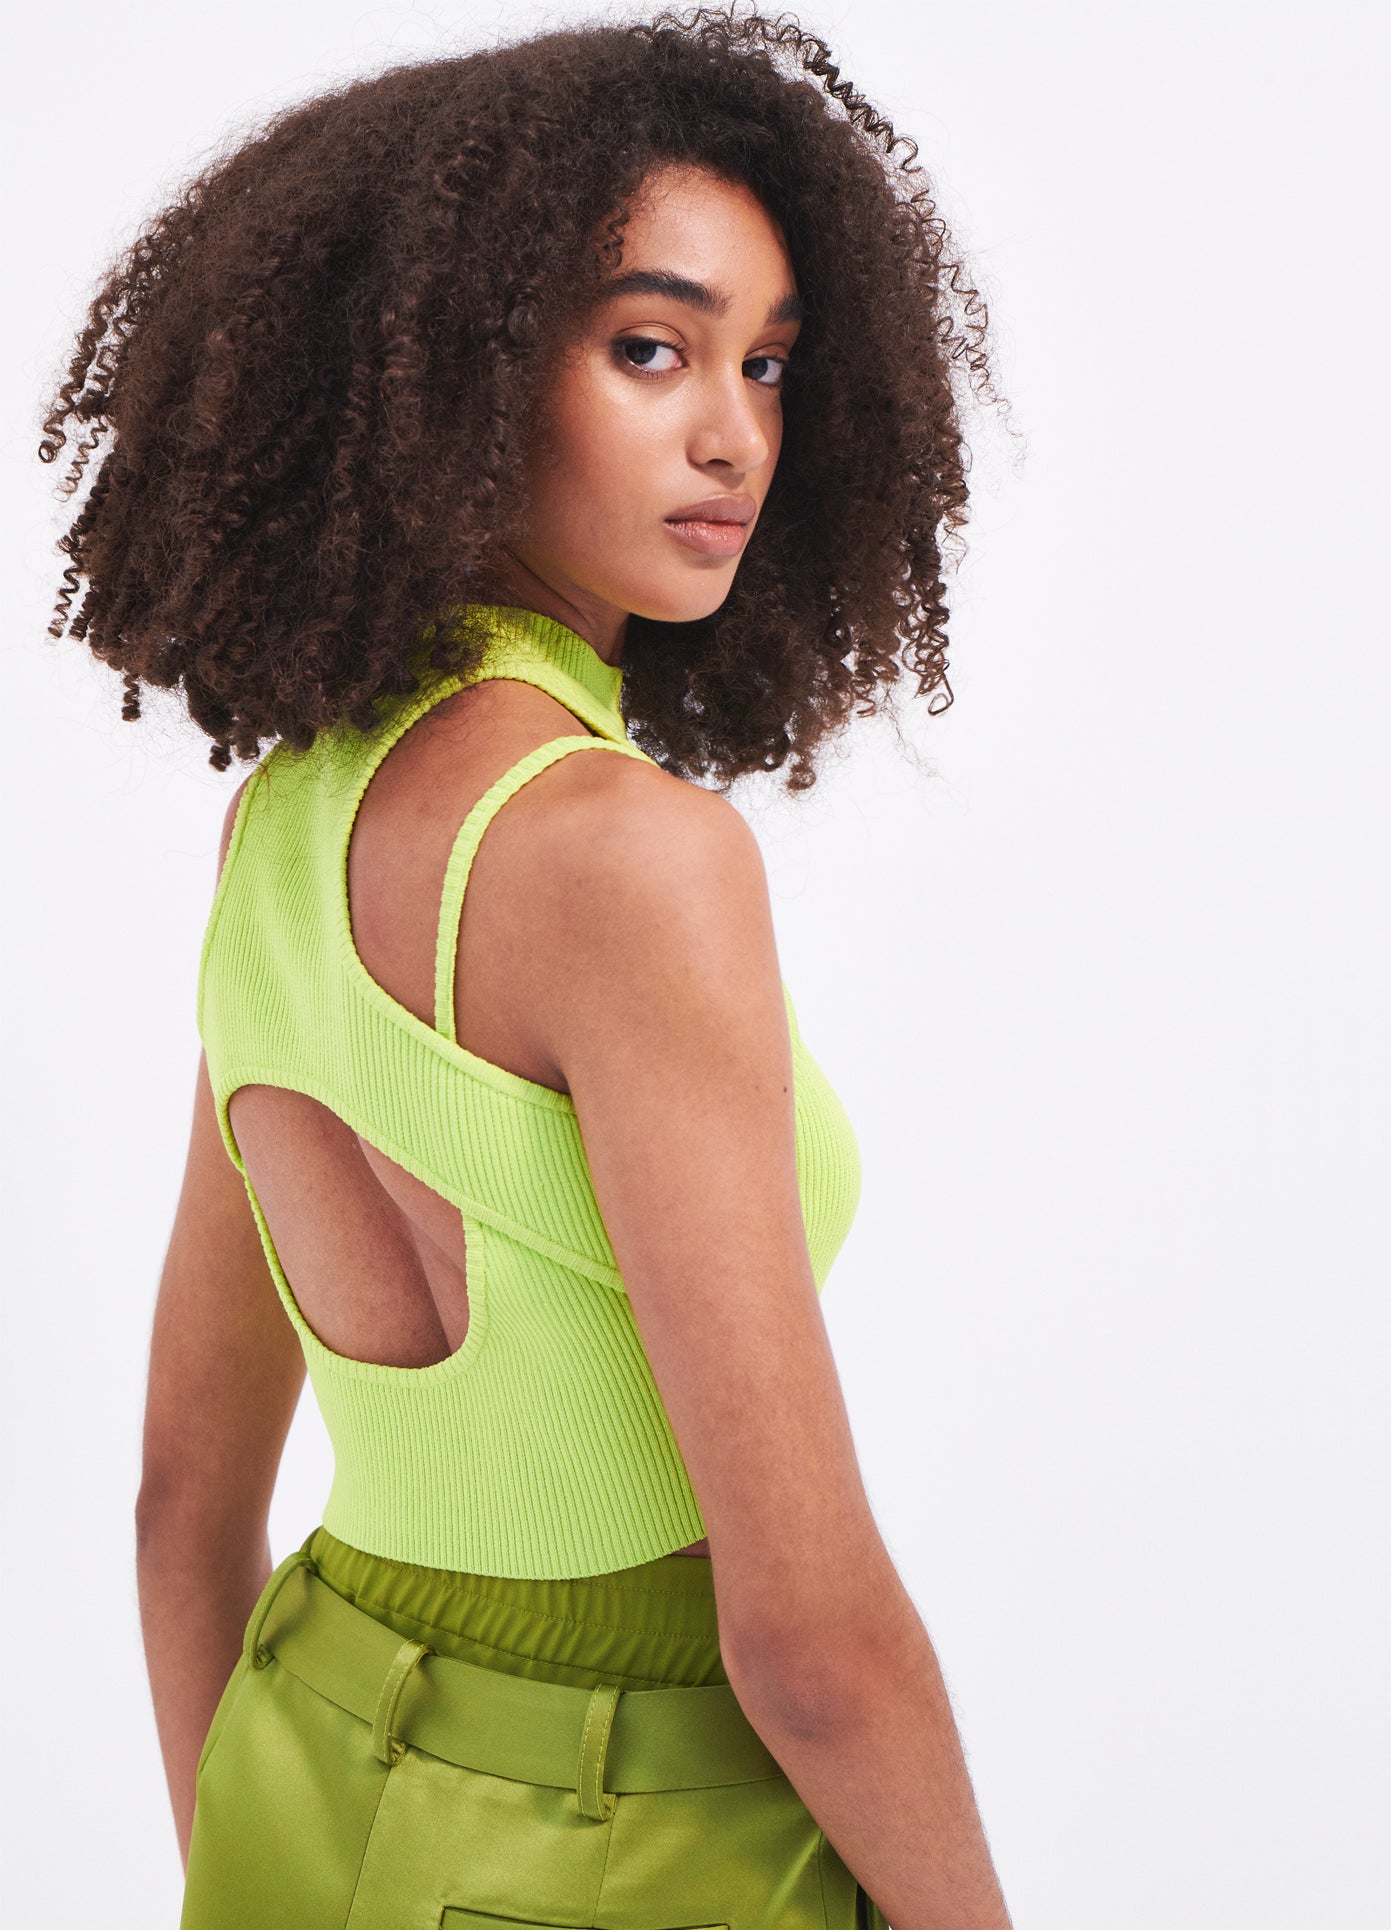 MONSE Halter Neck Knit Cropped Top in Neon Green on model side back view